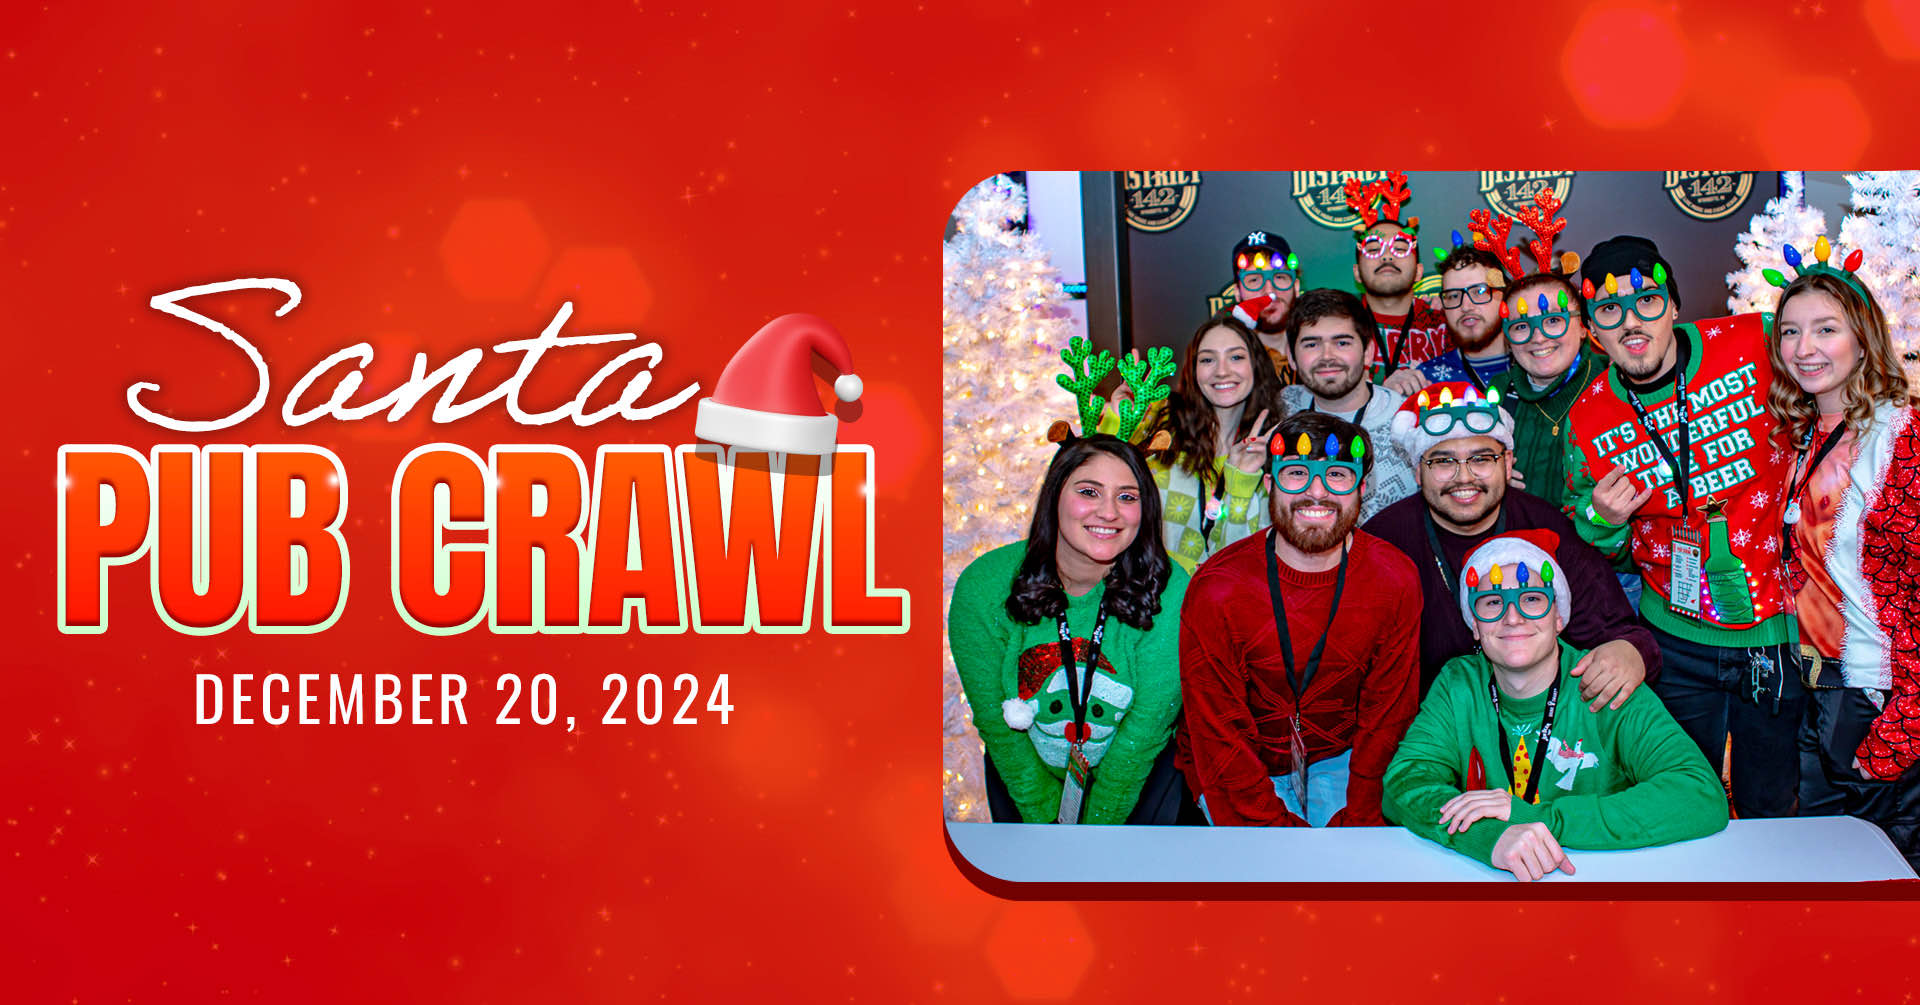 Santa Pub Crawl; December 20, 2024; image of group of pub crawlers wearing holiday outfits and Christmas light headbands and glasses